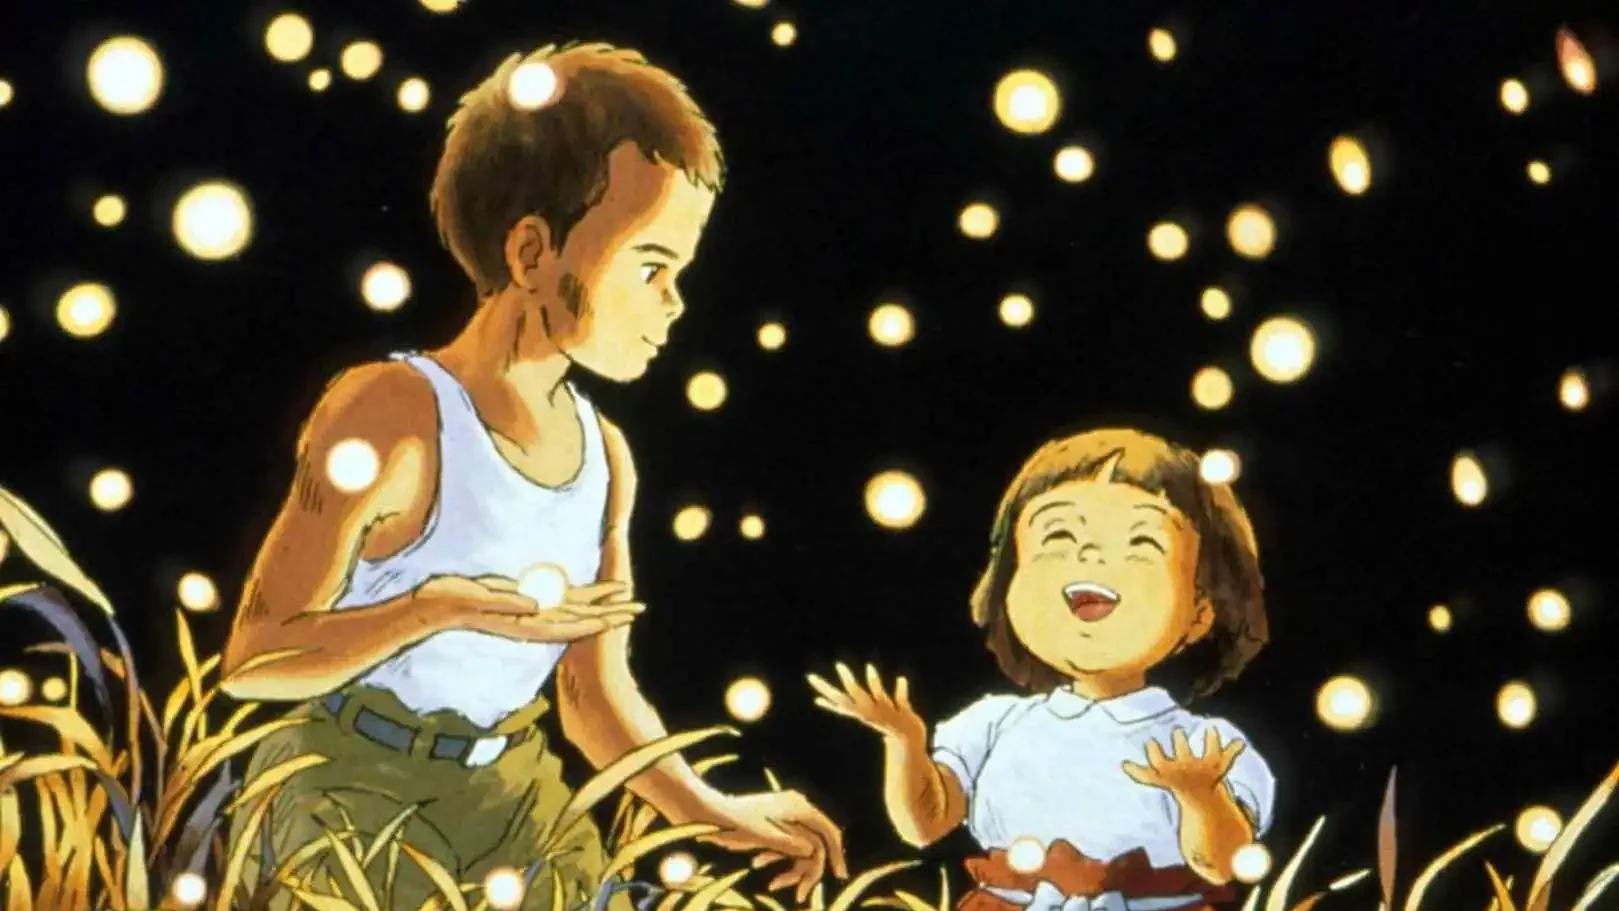 20 Sad Anime Movies On Netflix To Make You Cry Your Eyes Out